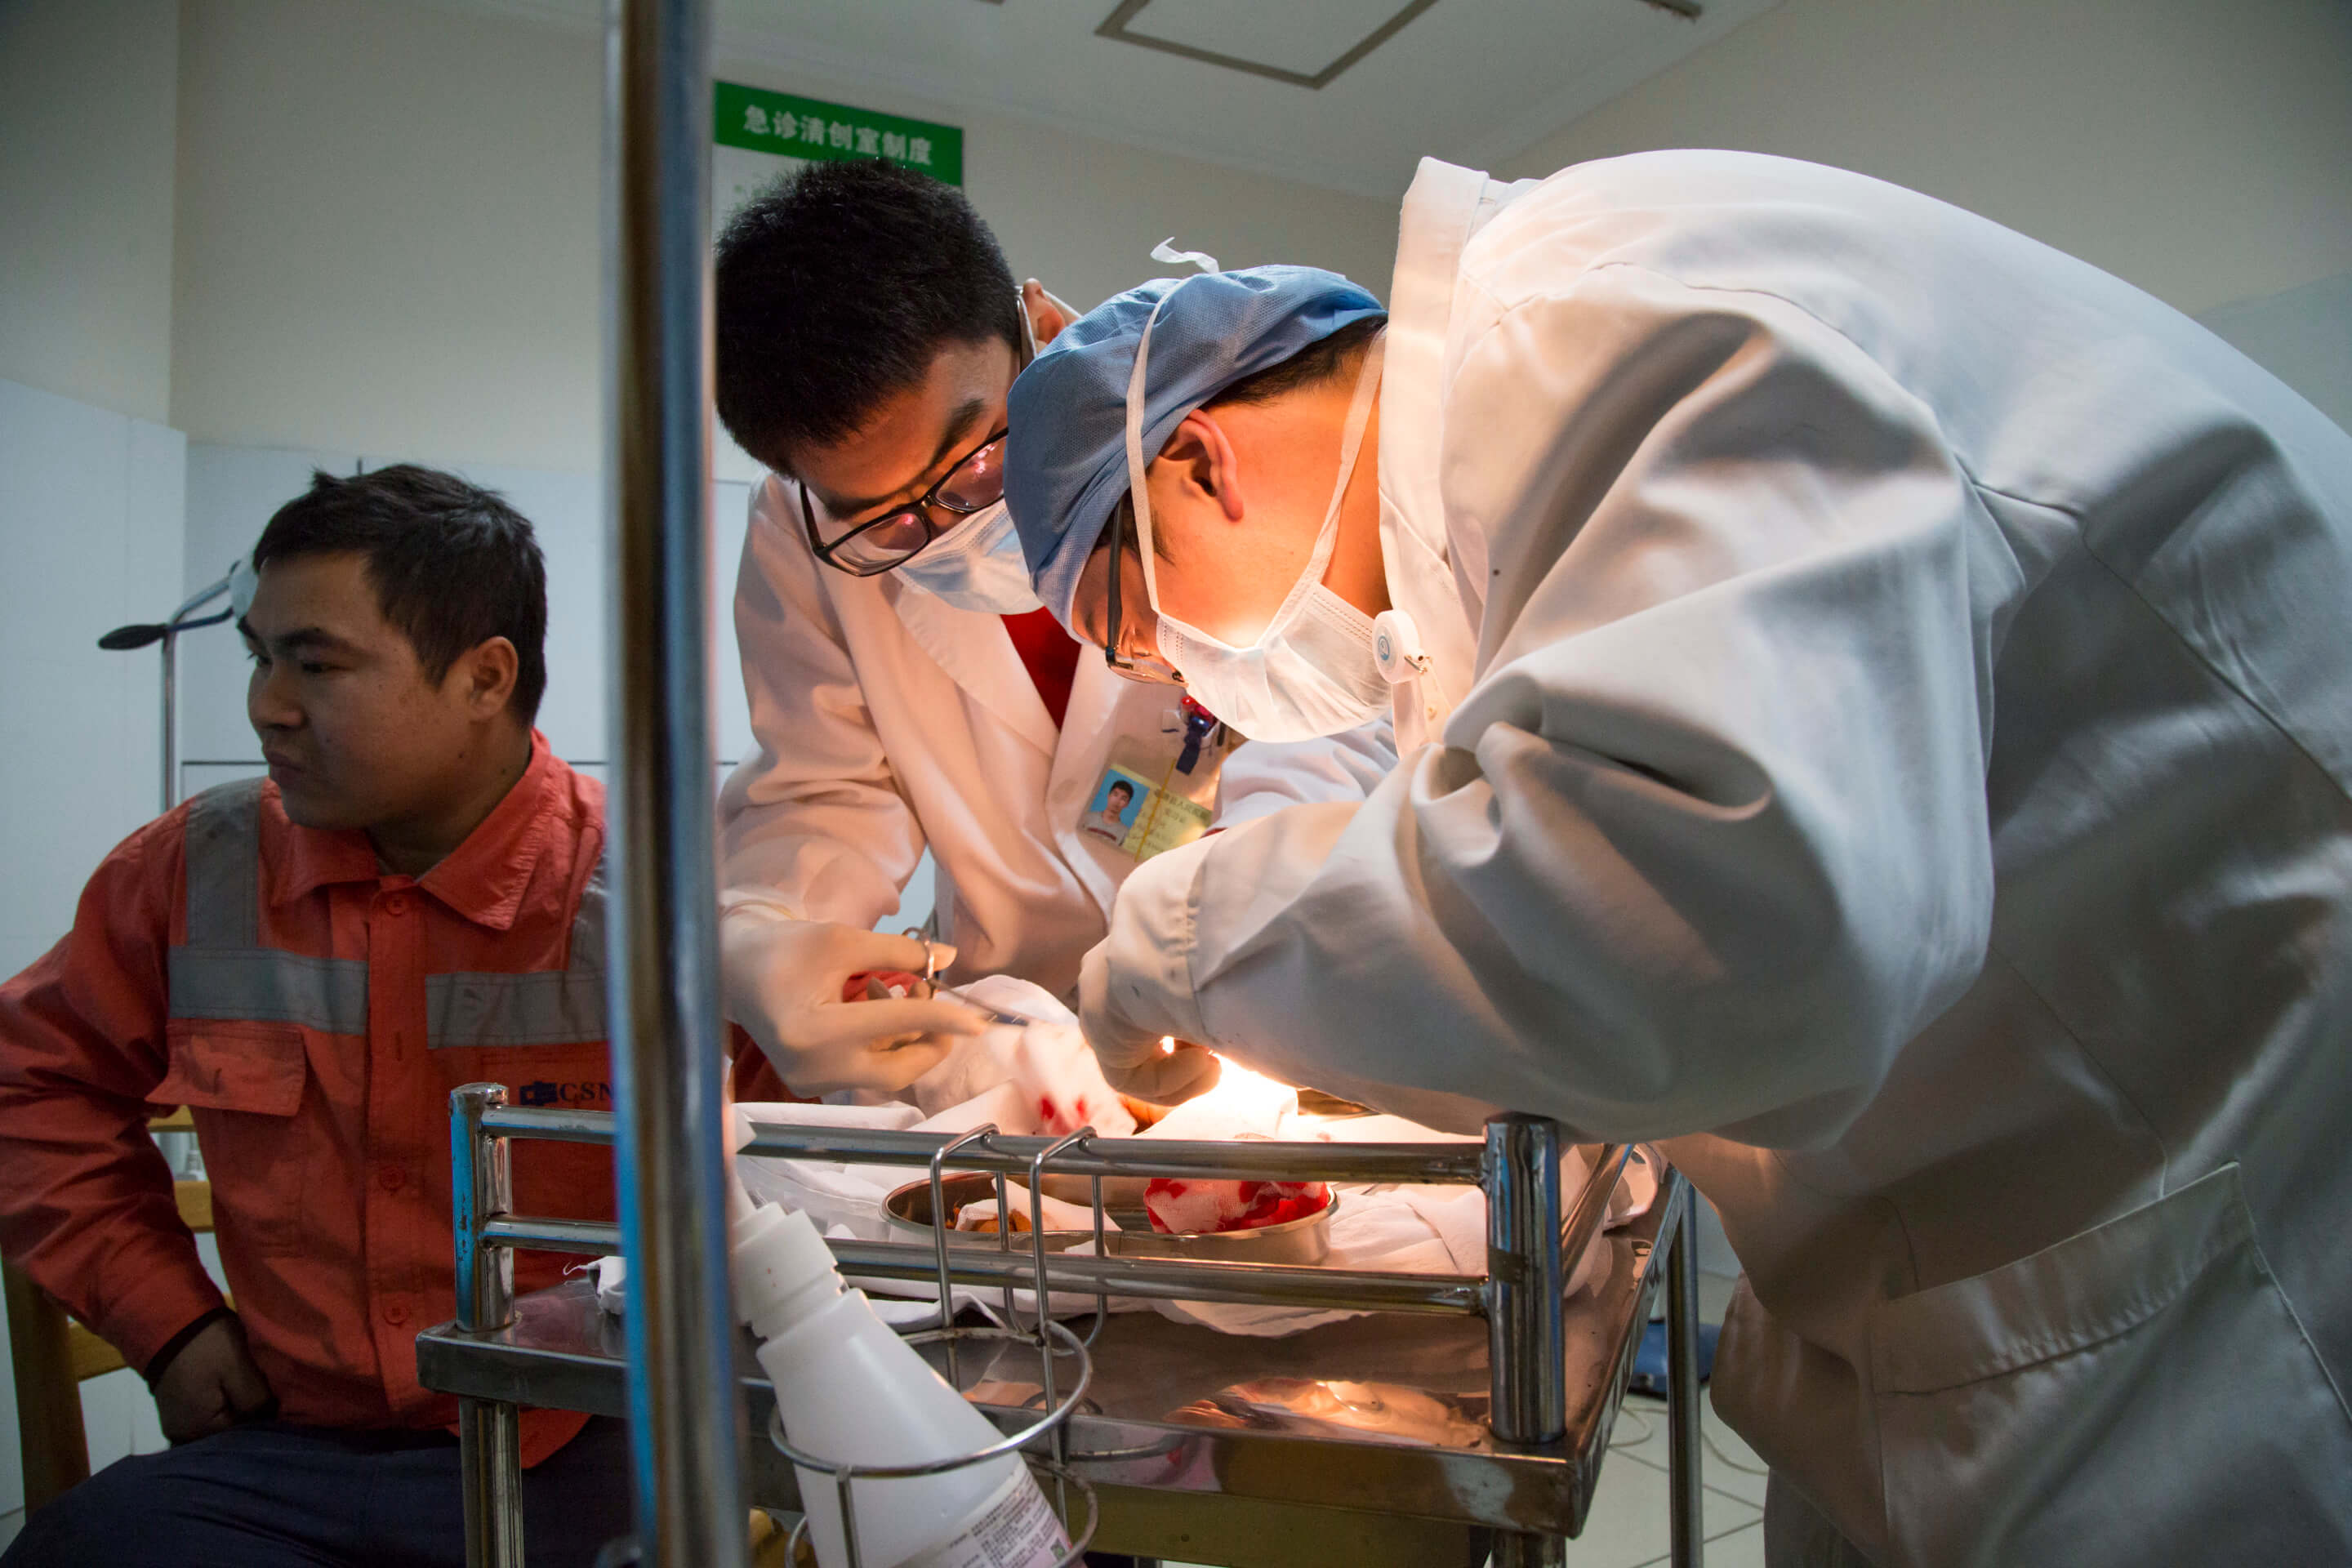 Two medical staff in lab coats hover over a brightly lit tray of bloody gauze and a man in an orange jacket sits nearby